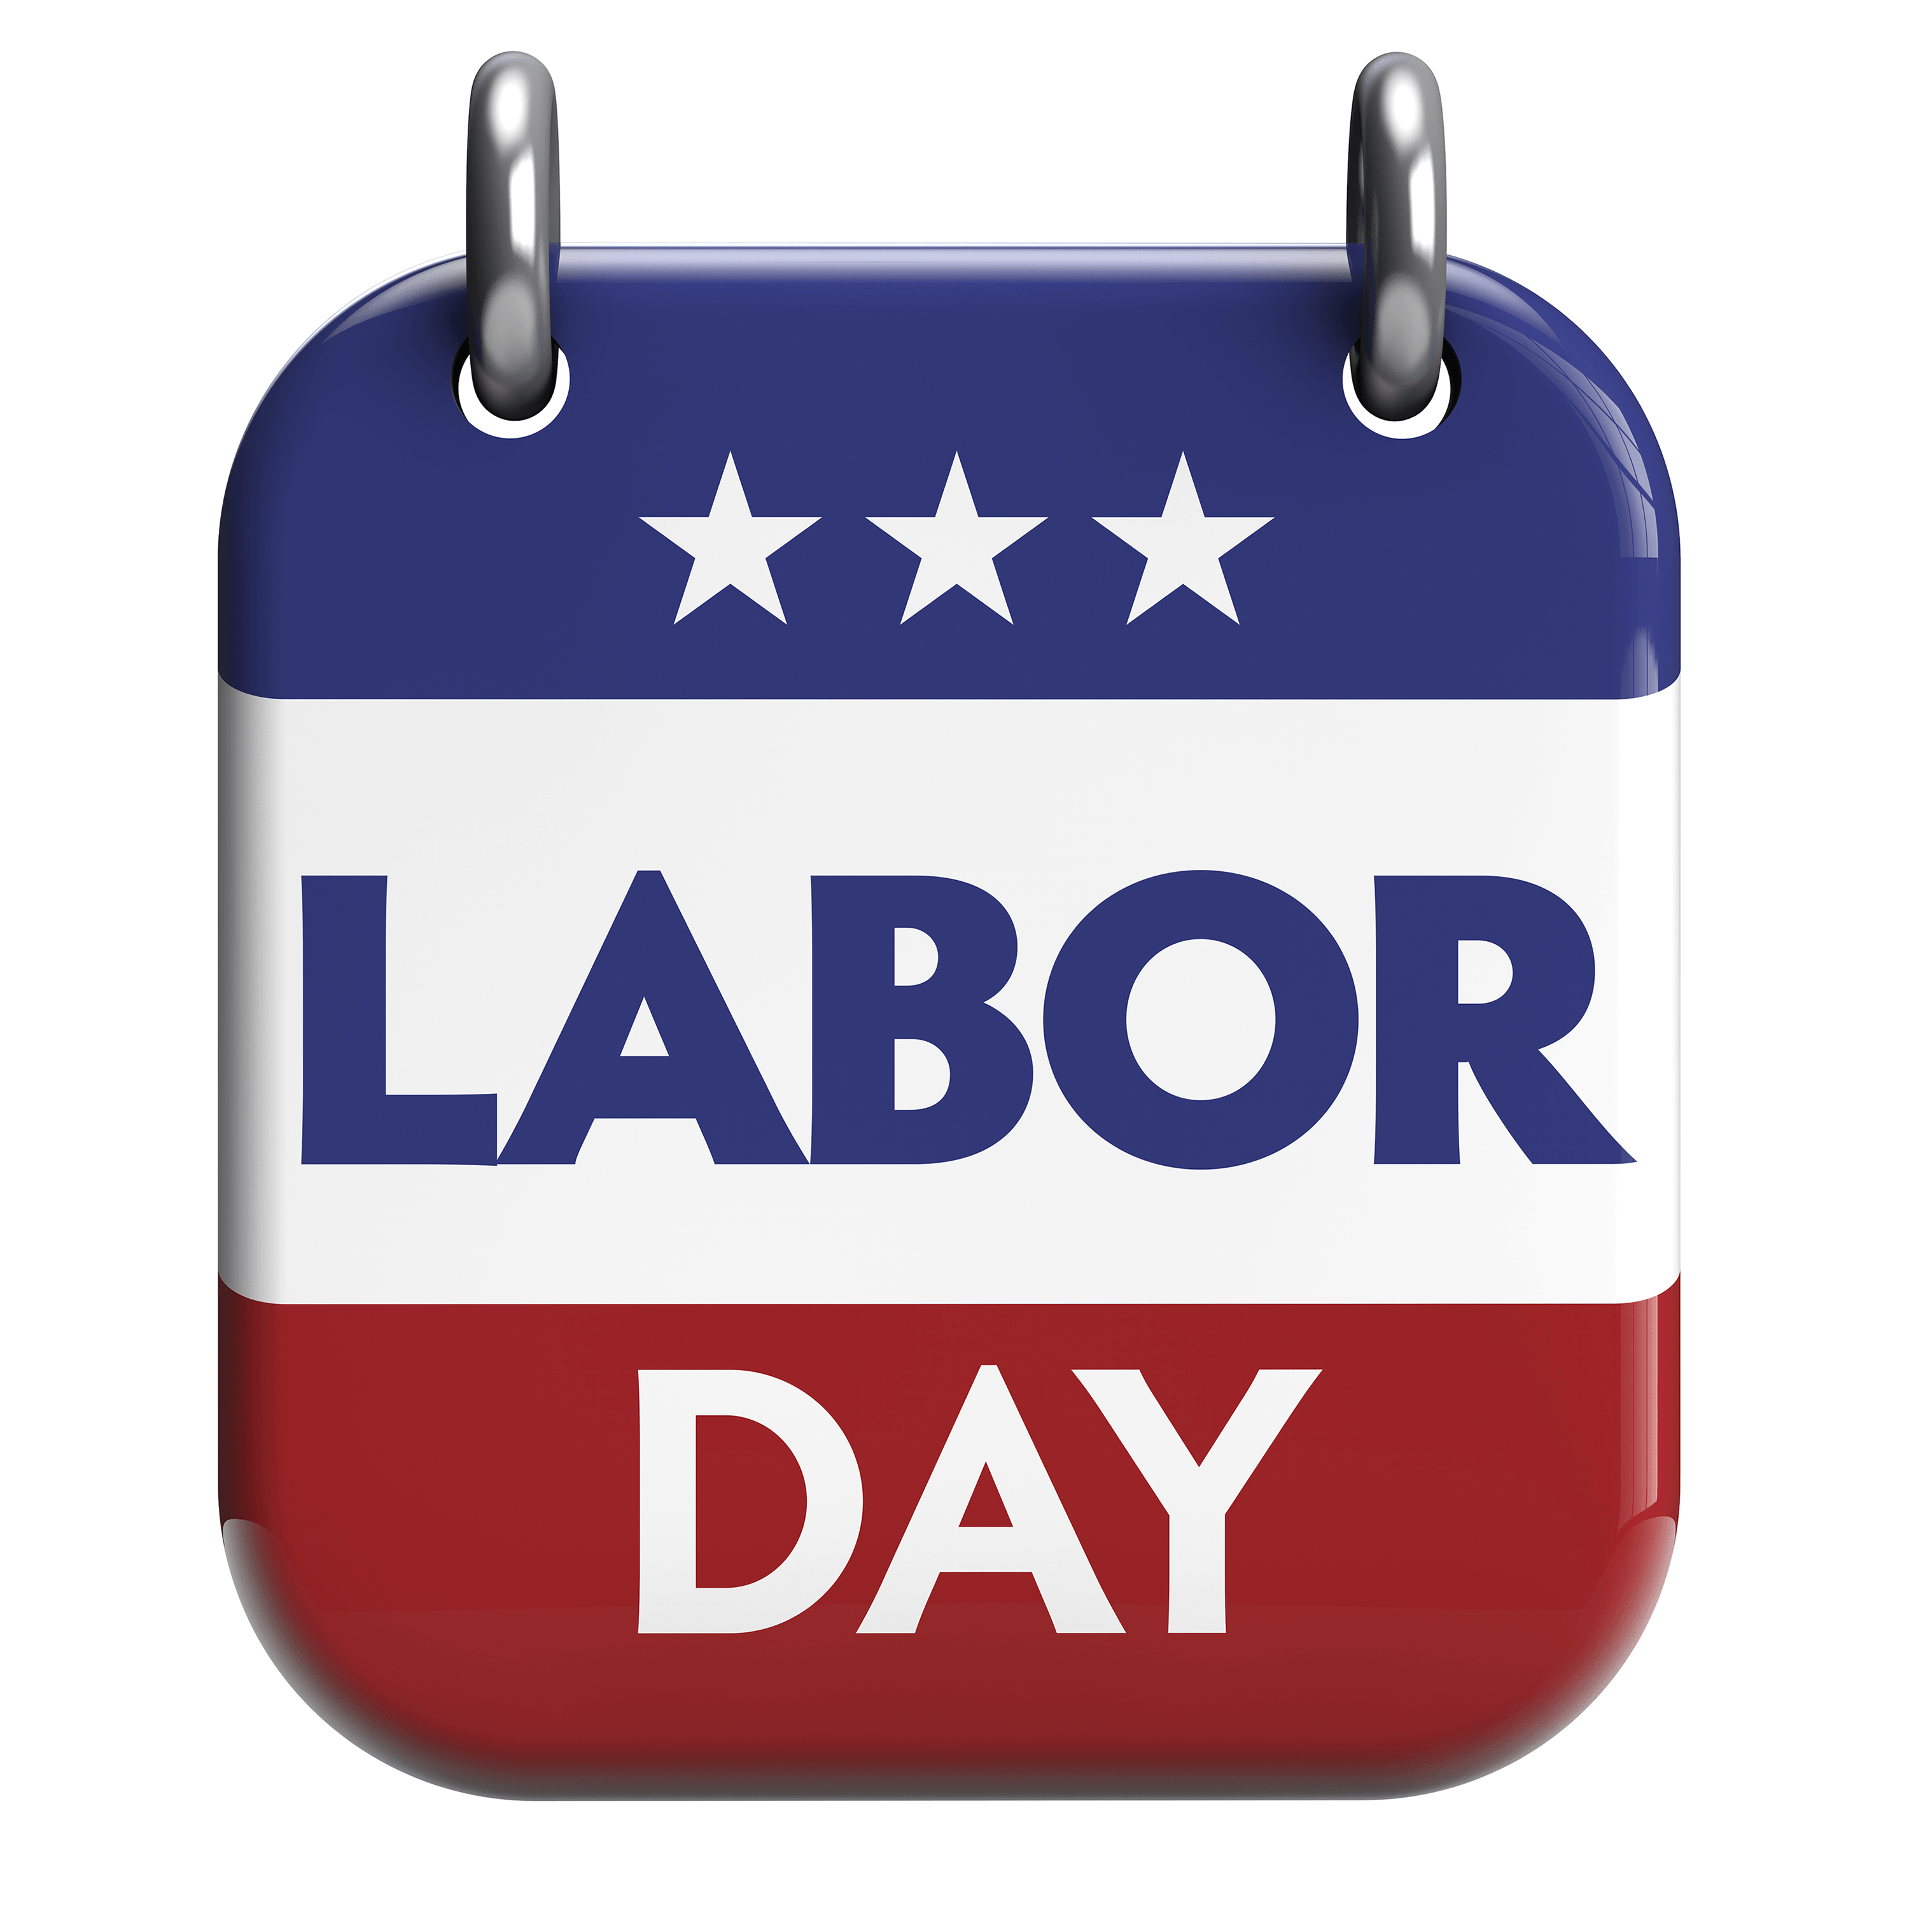 Labor Day Image, Labor Day Wallpaper For Free Download, GLaureL